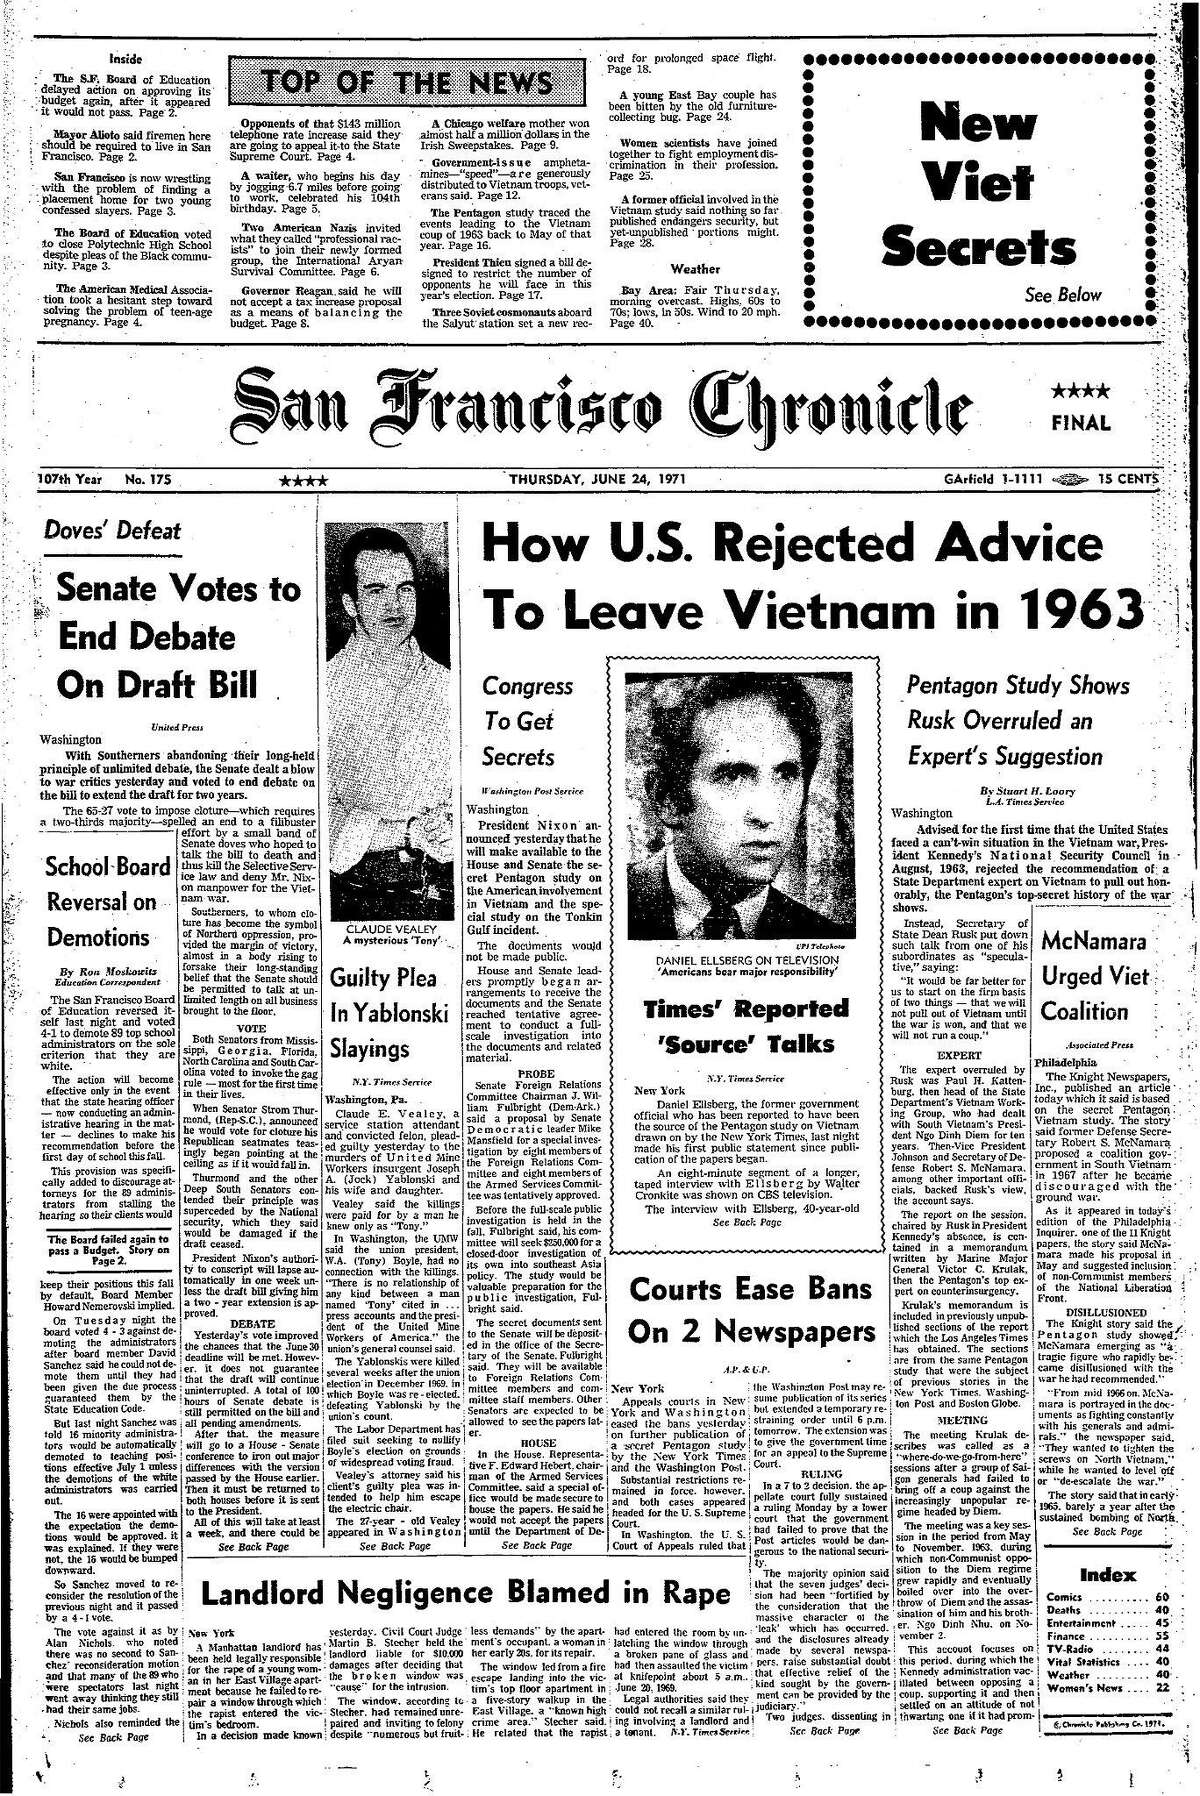 Historic Chronicle Front Page June 24, 1971 front page Pentagon Papers gain wider release Chron365, Chroncover